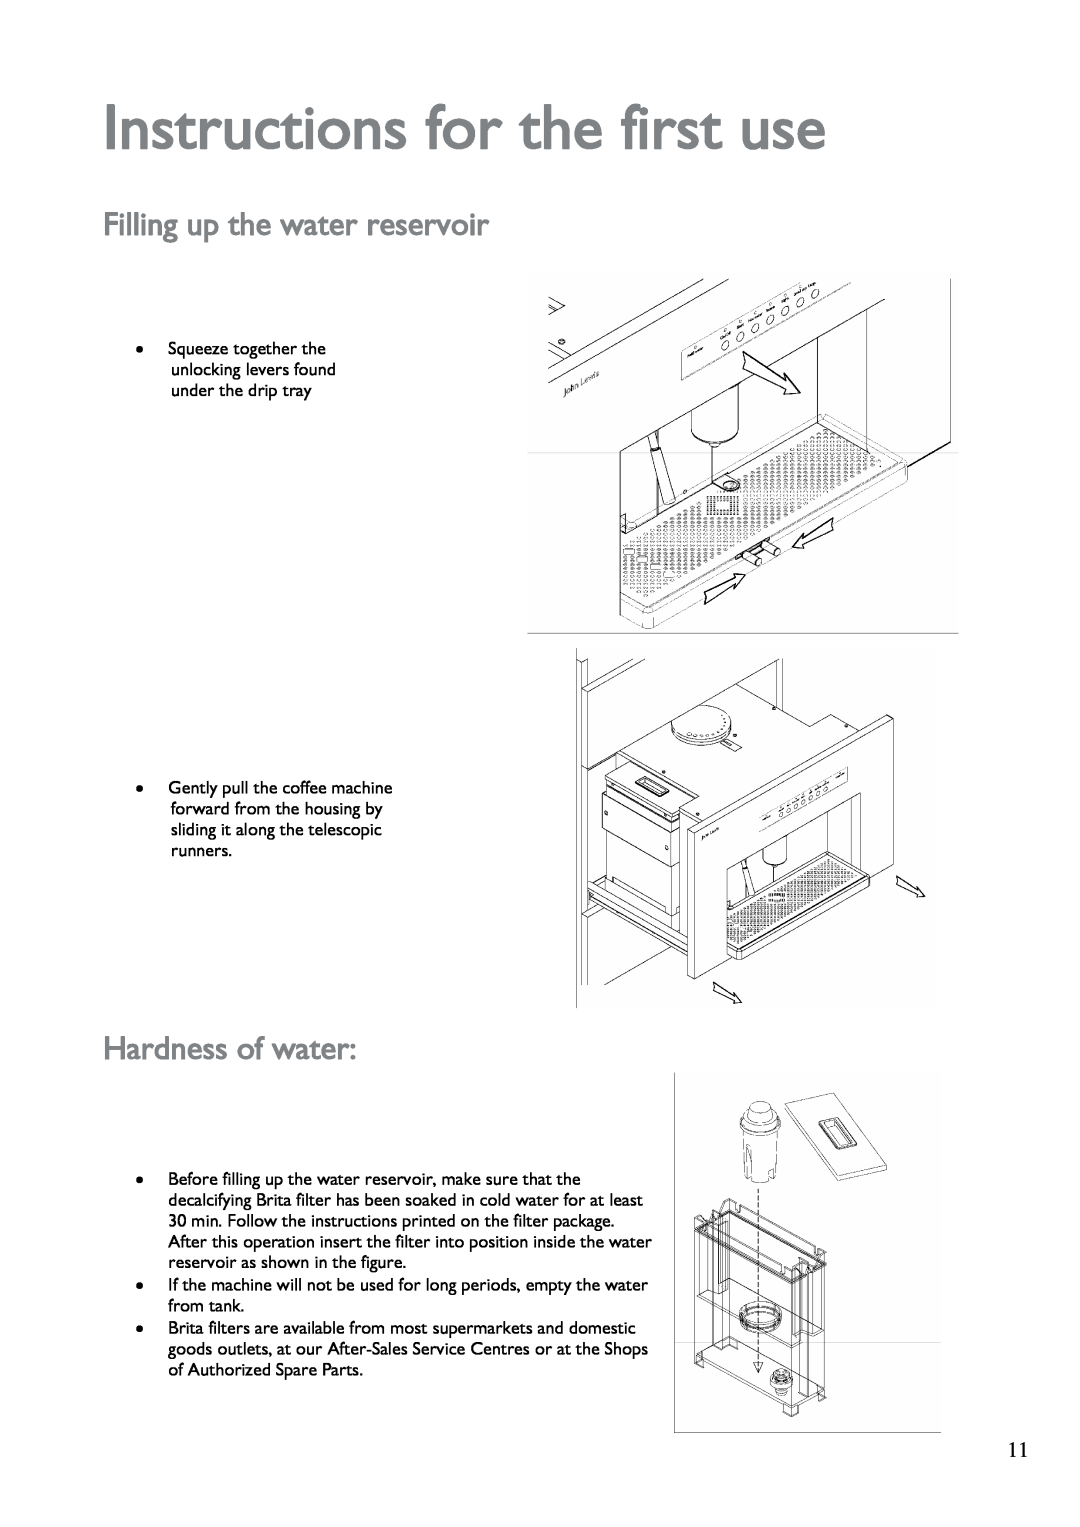 John Lewis JLBICM 01 instruction manual Instructions for the first use, Filling up the water reservoir, Hardness of water 